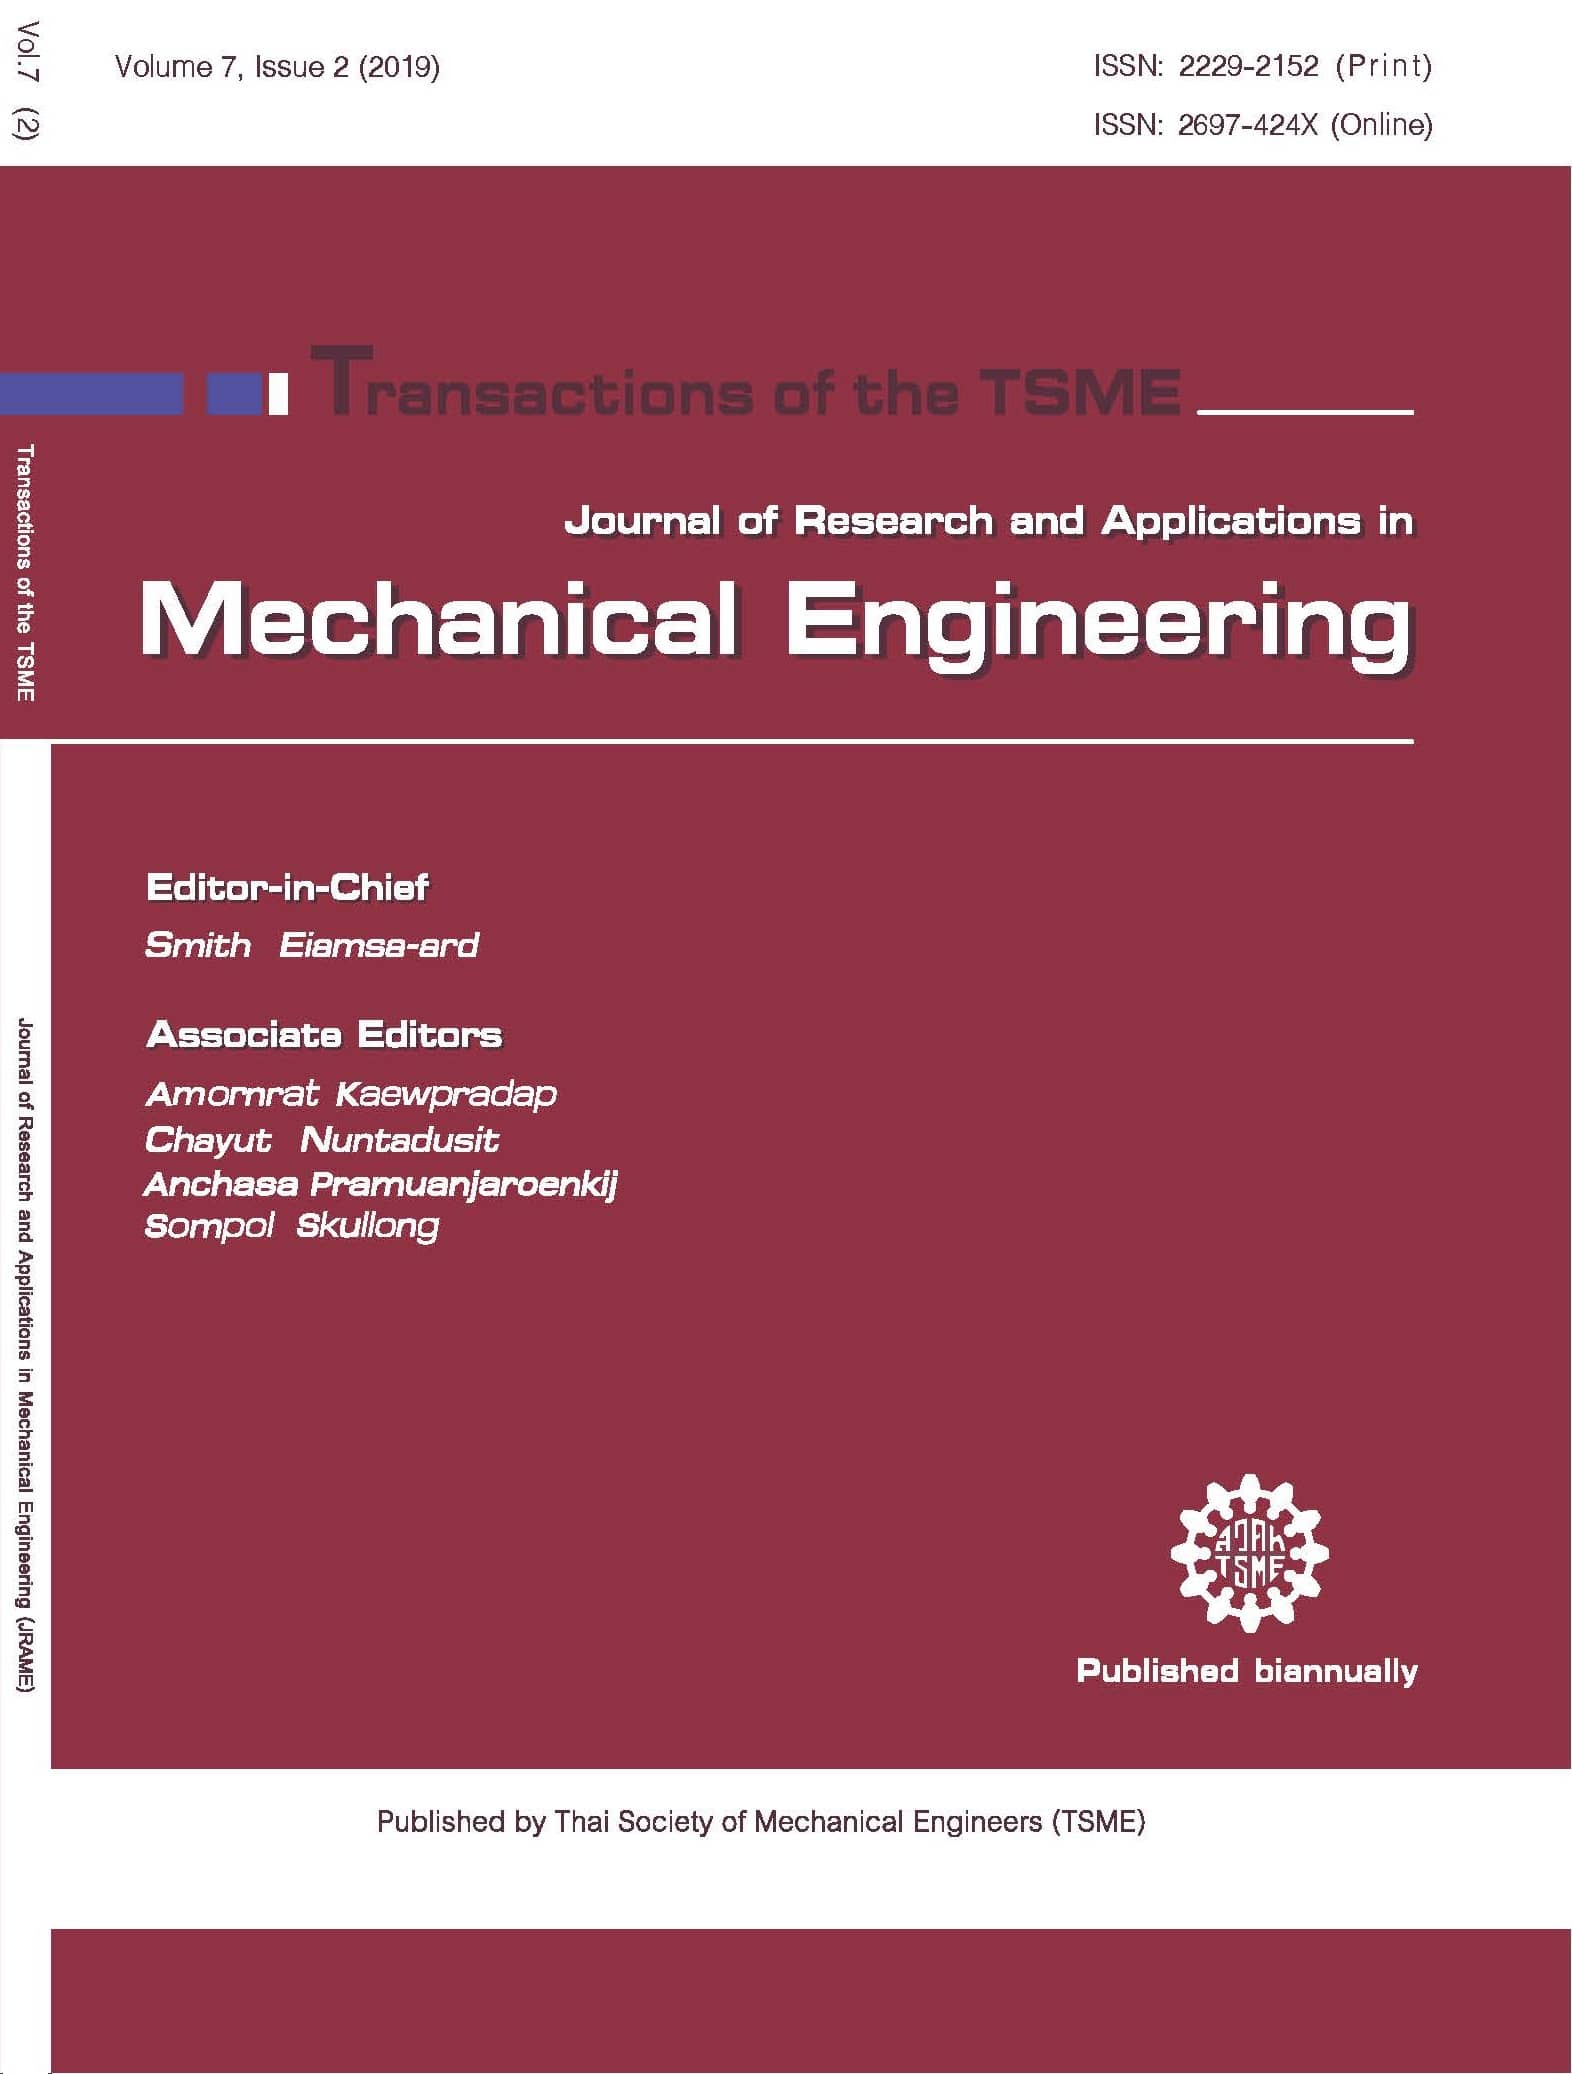 Cover of Journal of Research and Applications in Mechanical Engineering (JRAME)